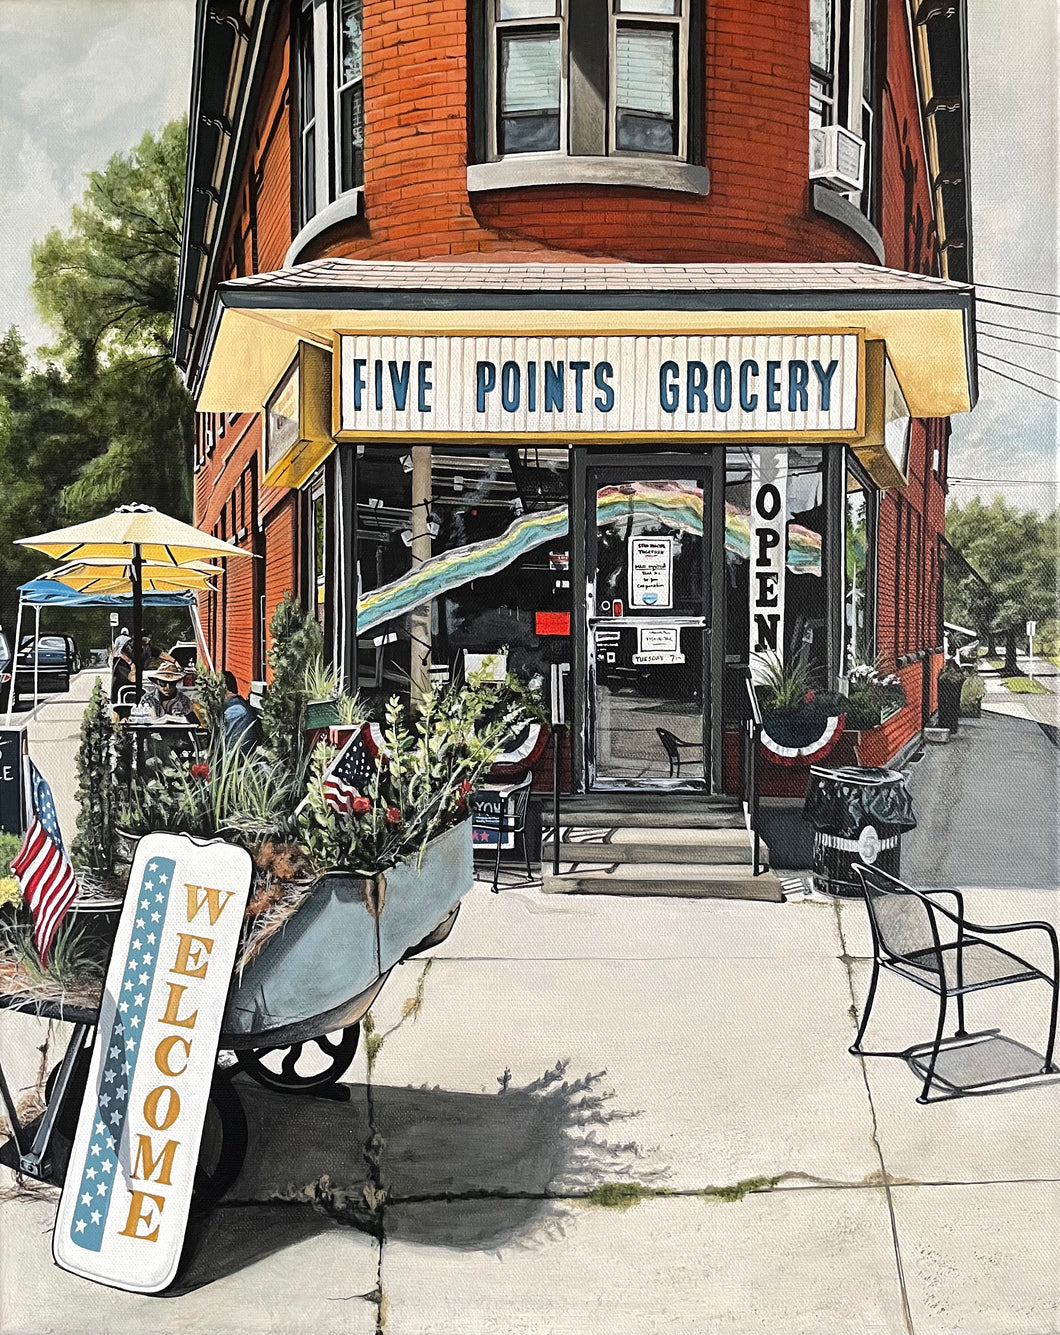 Five Points Grocery, 20”x16”